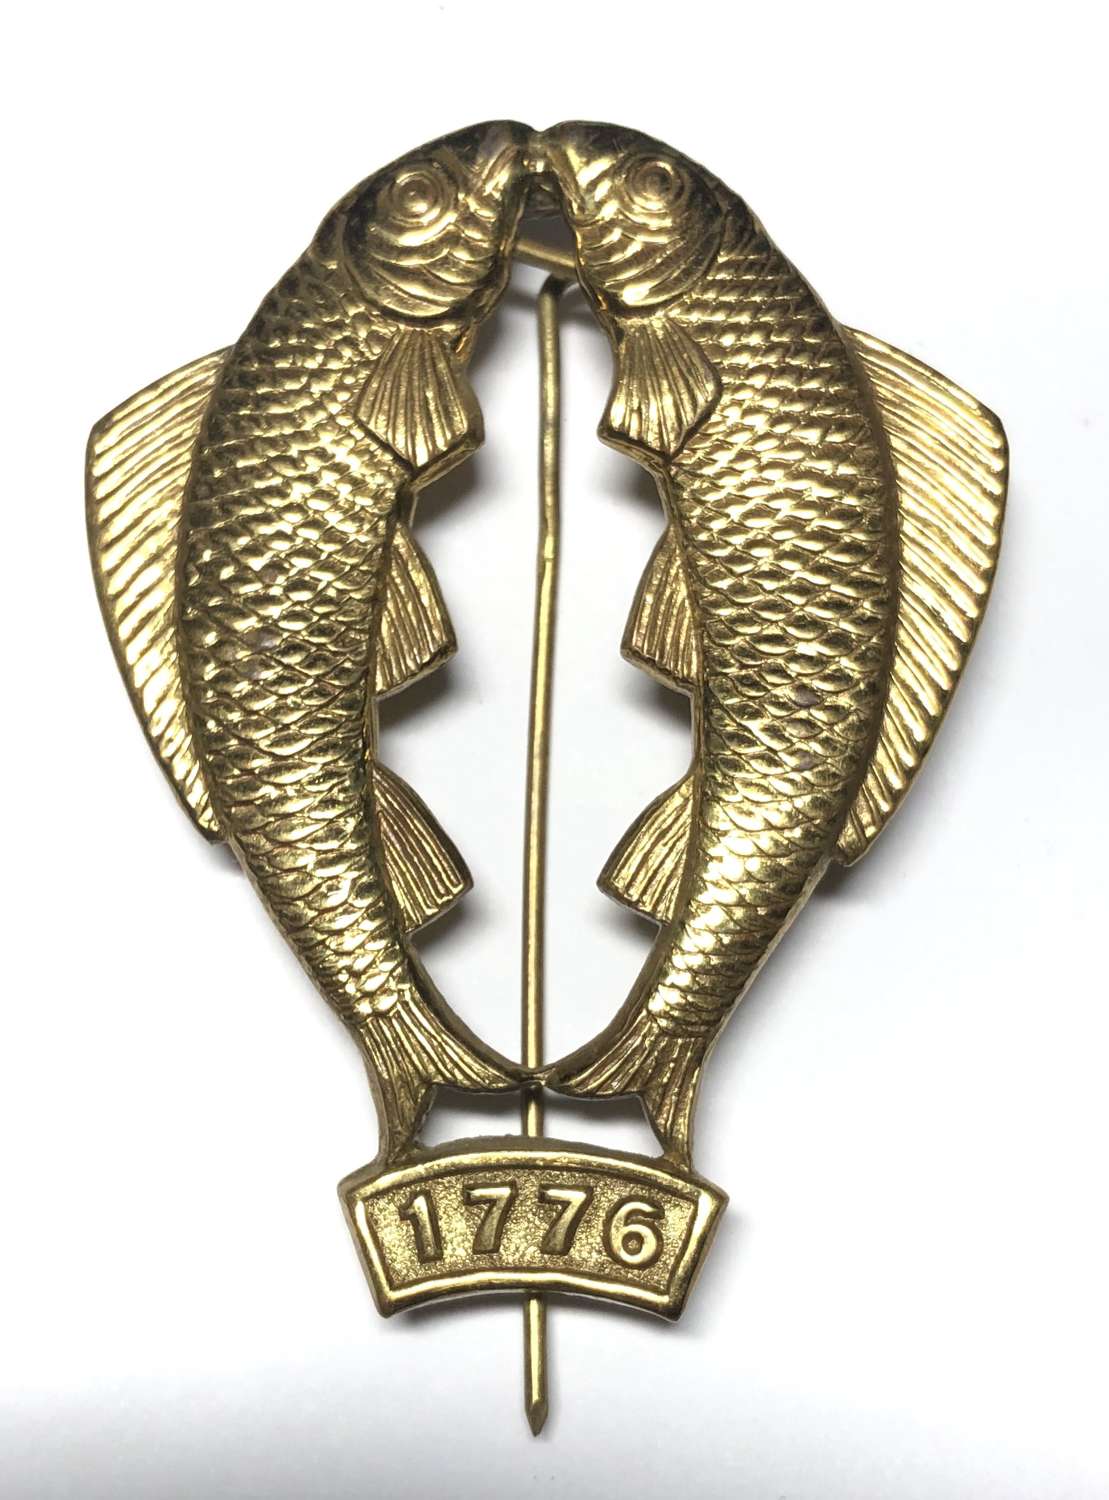 Indian Army. 1st Brahmans pagri badge circa 1903-22 by Gaunt, London